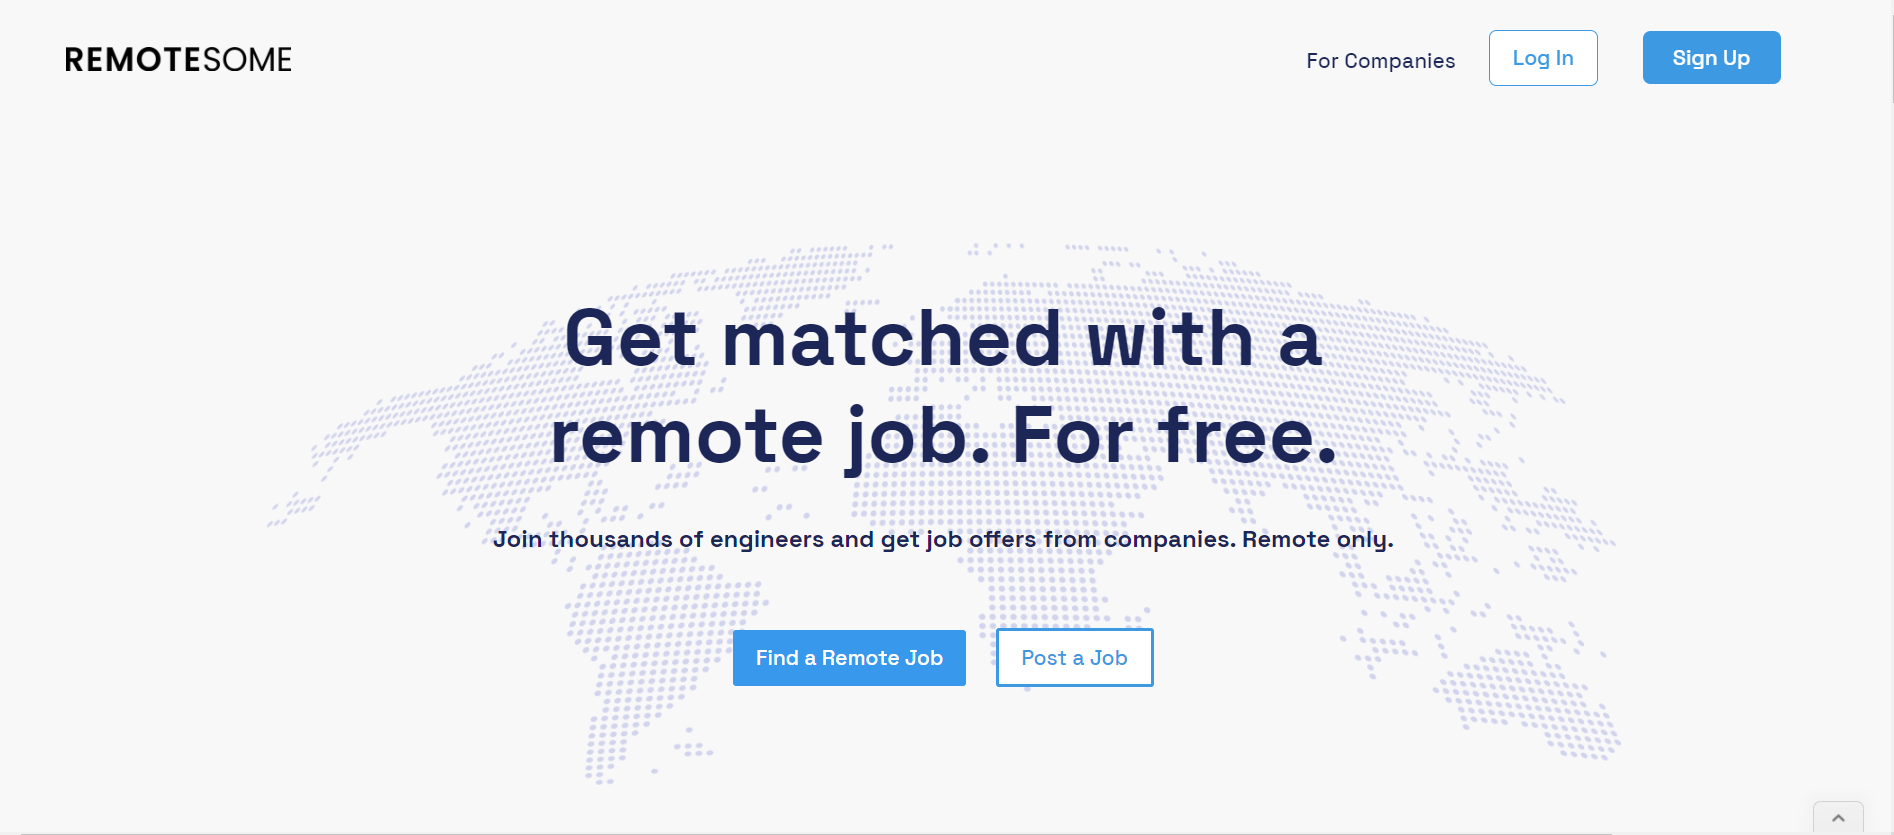 Find detailed information about Remotesome